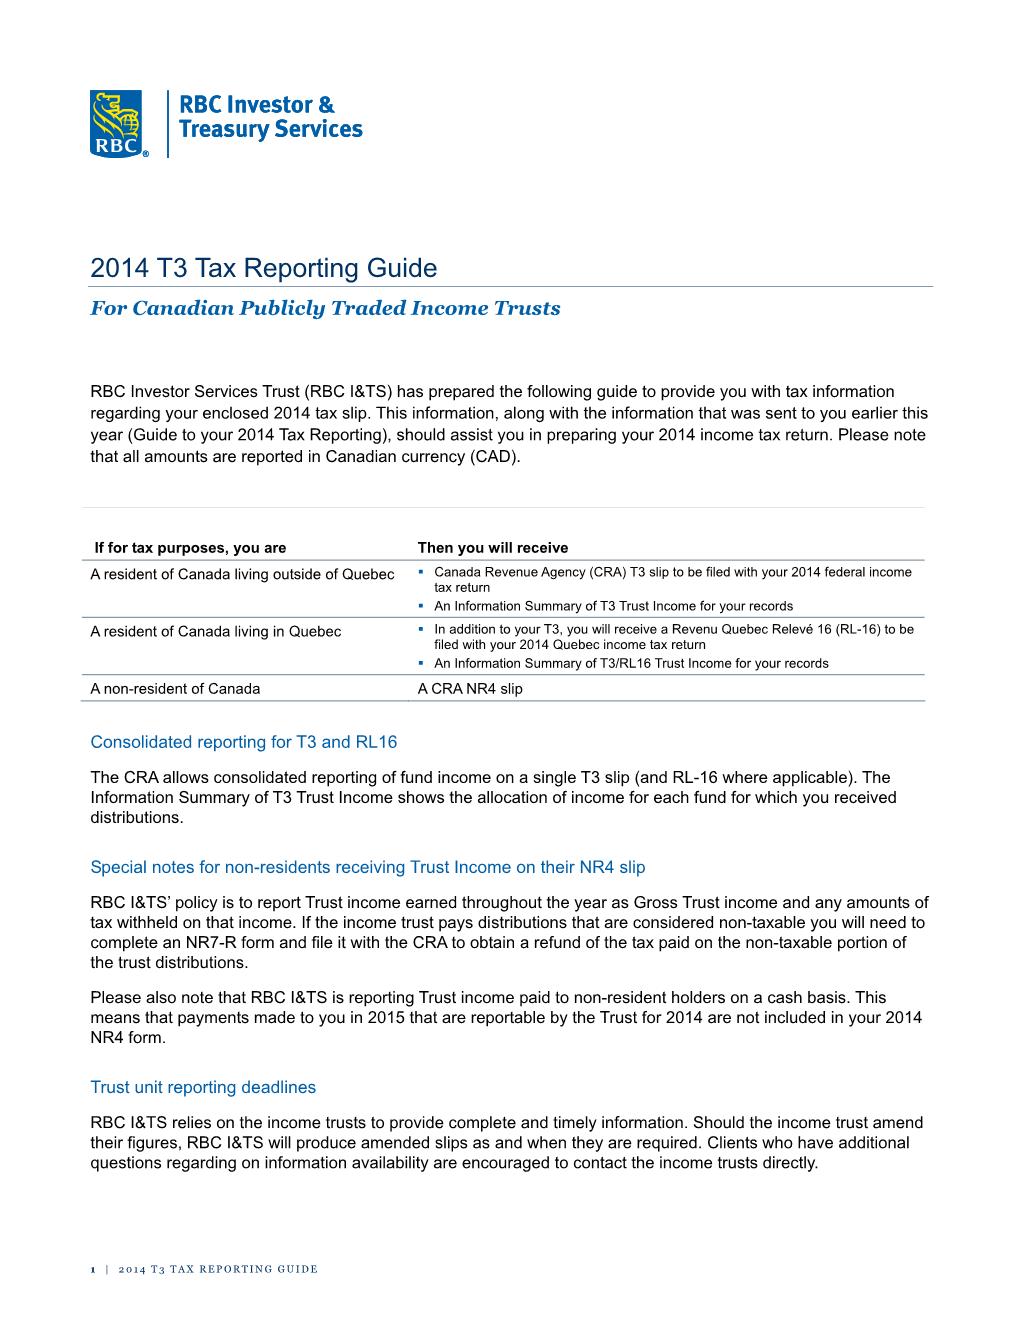 2014 T3 Tax Reporting Guide for Canadian Publicly Traded Income Trusts